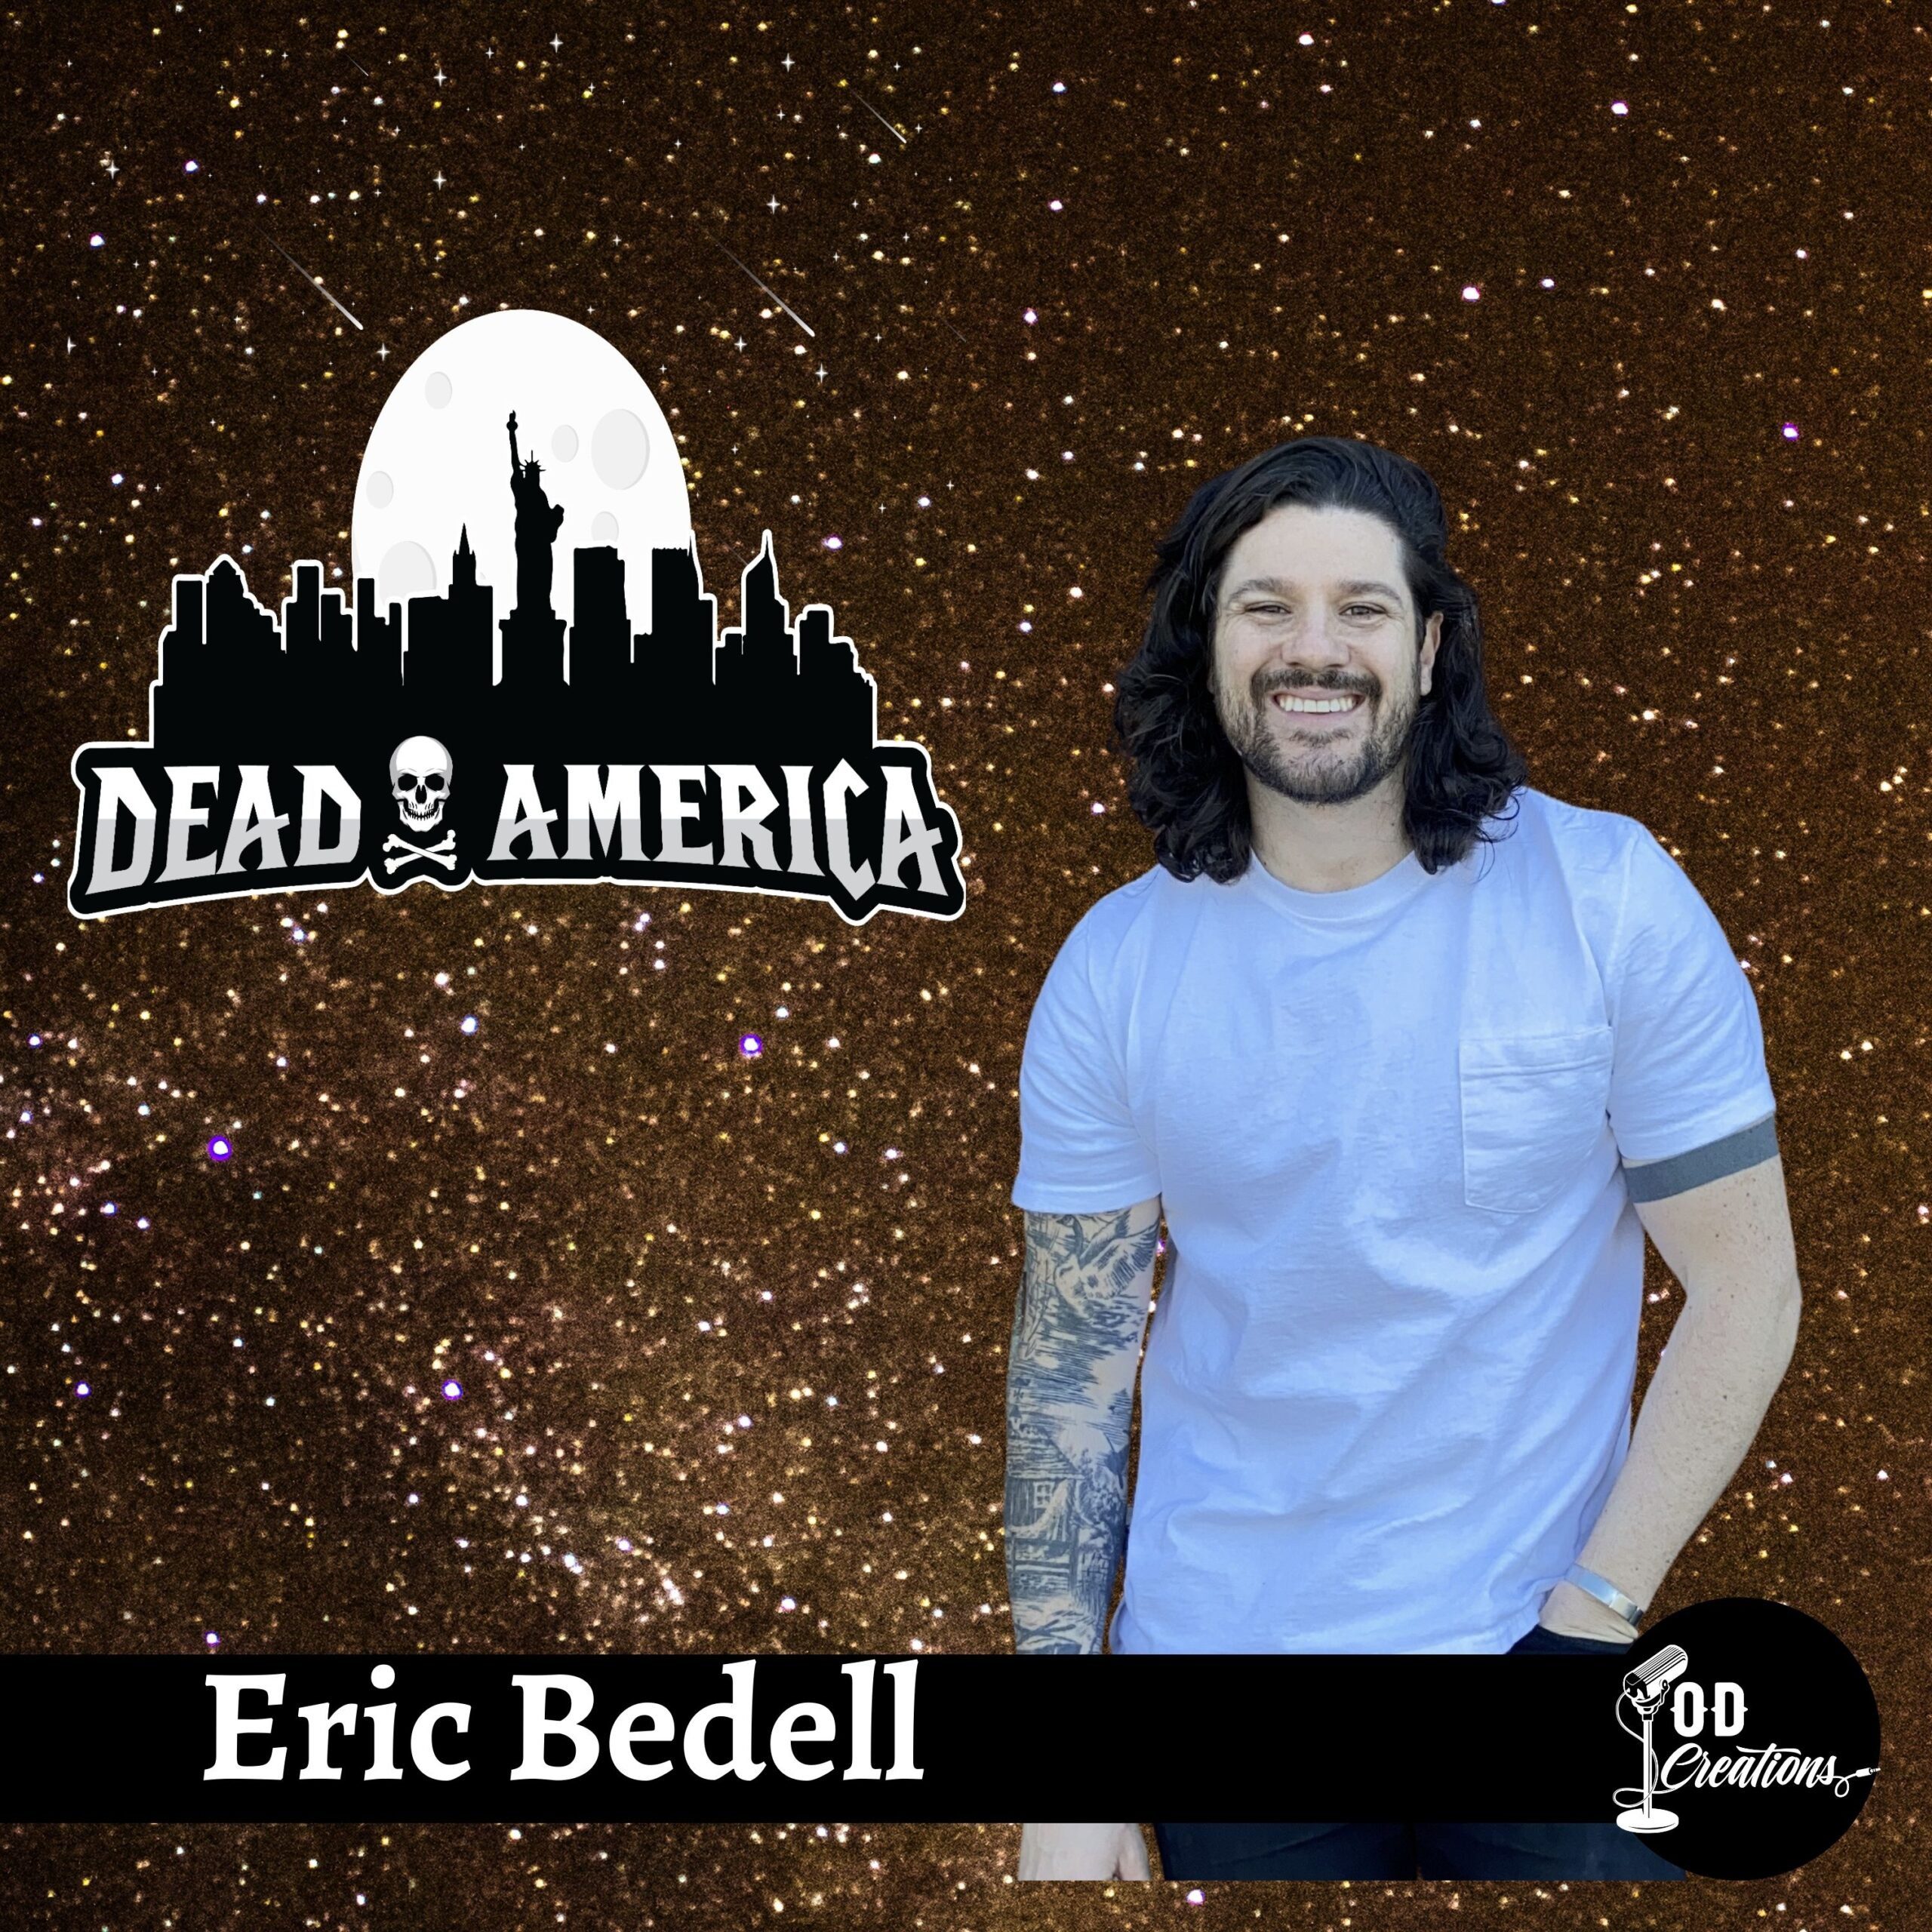 Eric Bedell